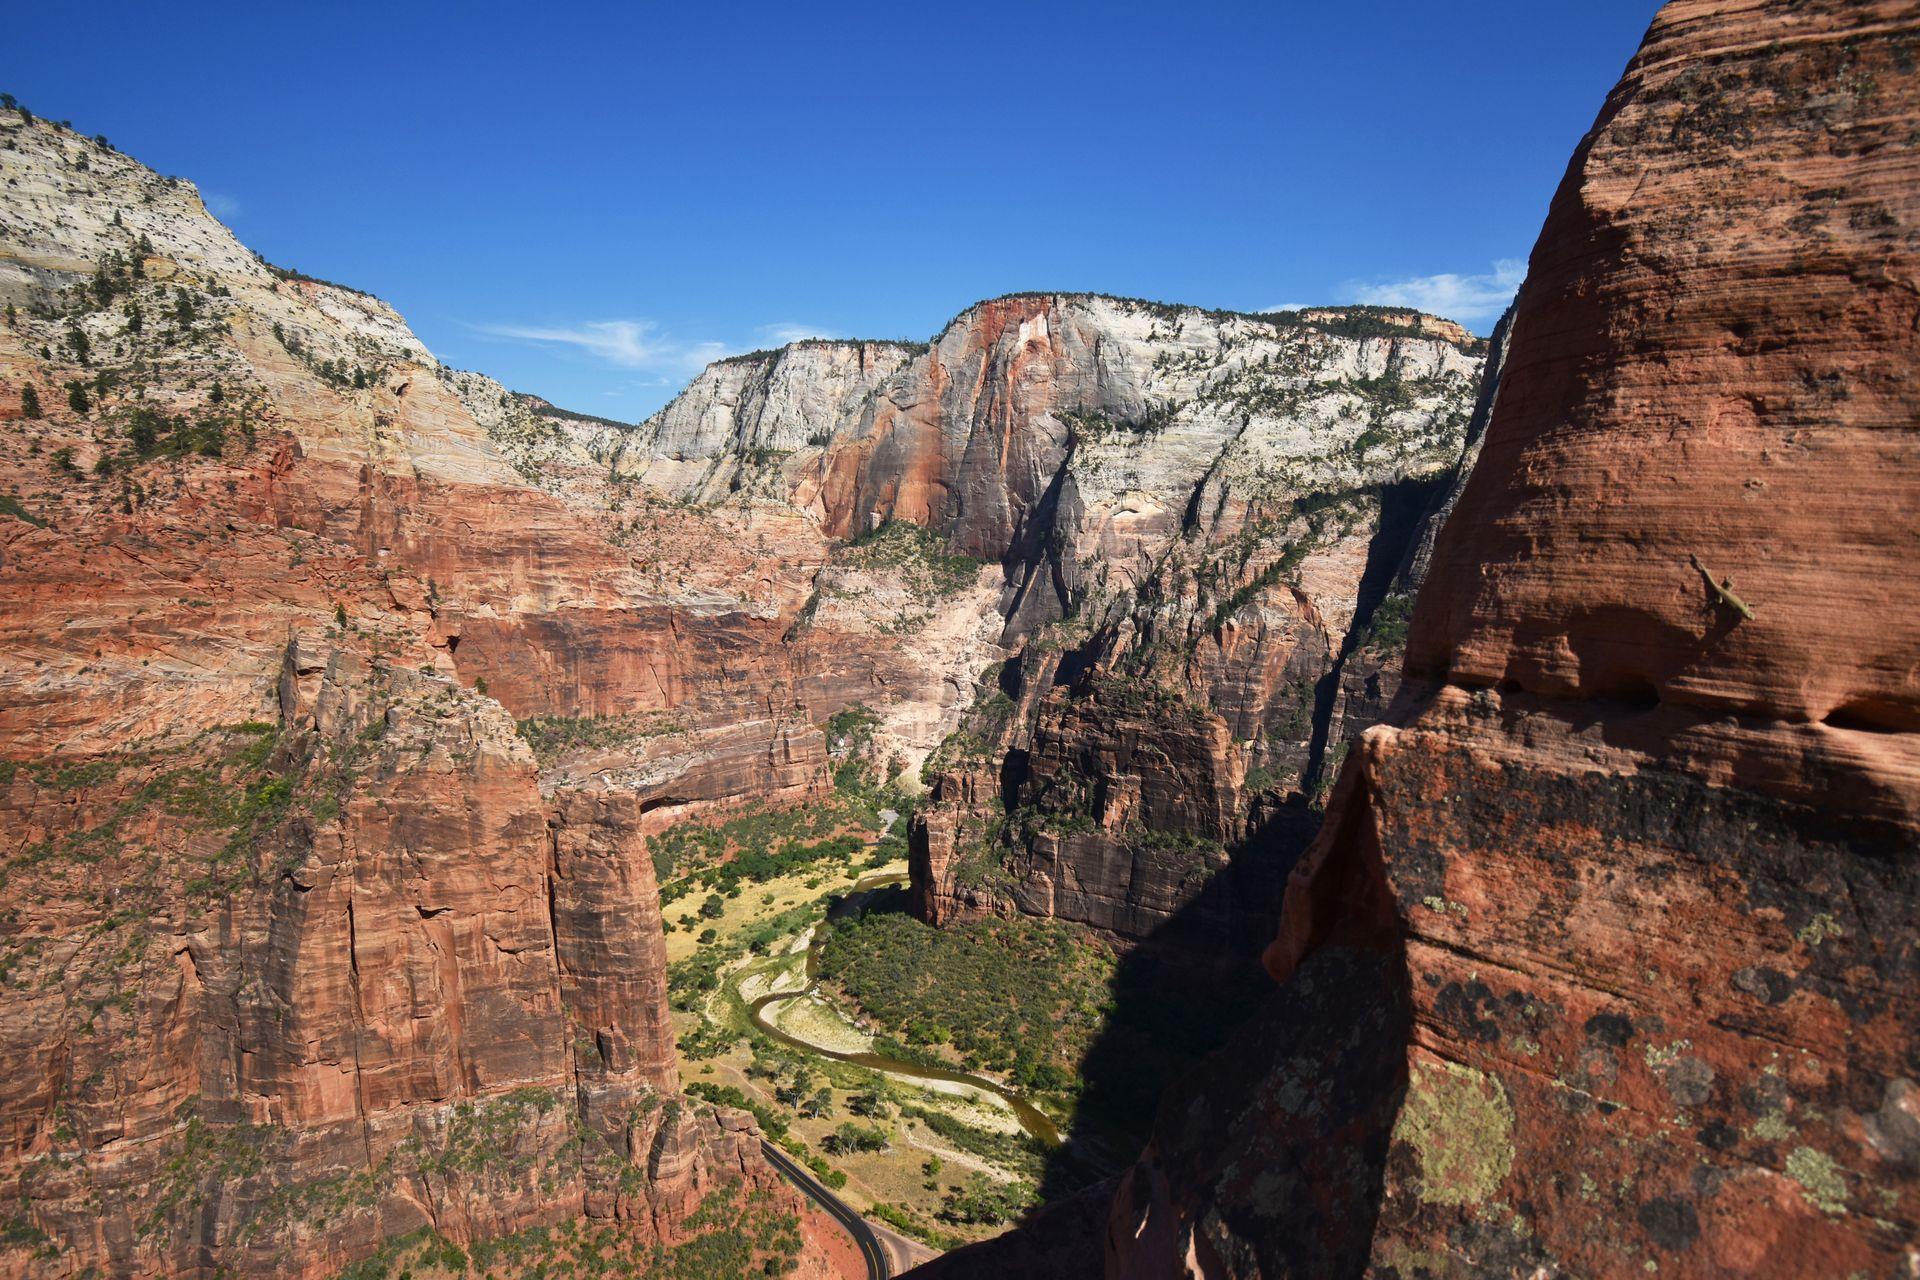 A view of a giant, orange canyon from the Angel's Landing trail in Zion National Park.